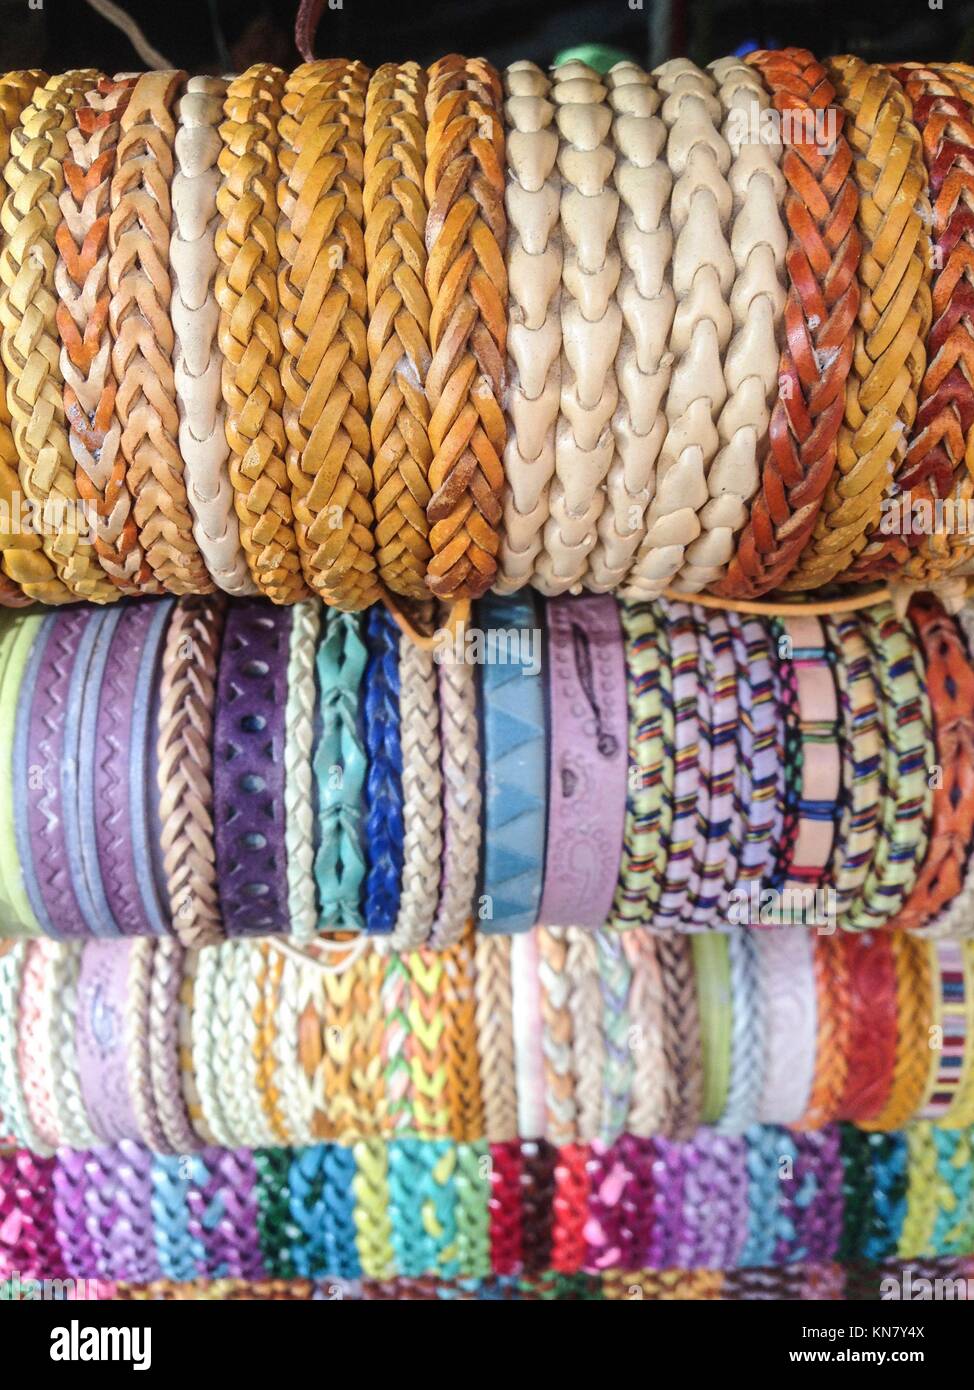 display full of handcrafts colorful bracelets. Stock Photo